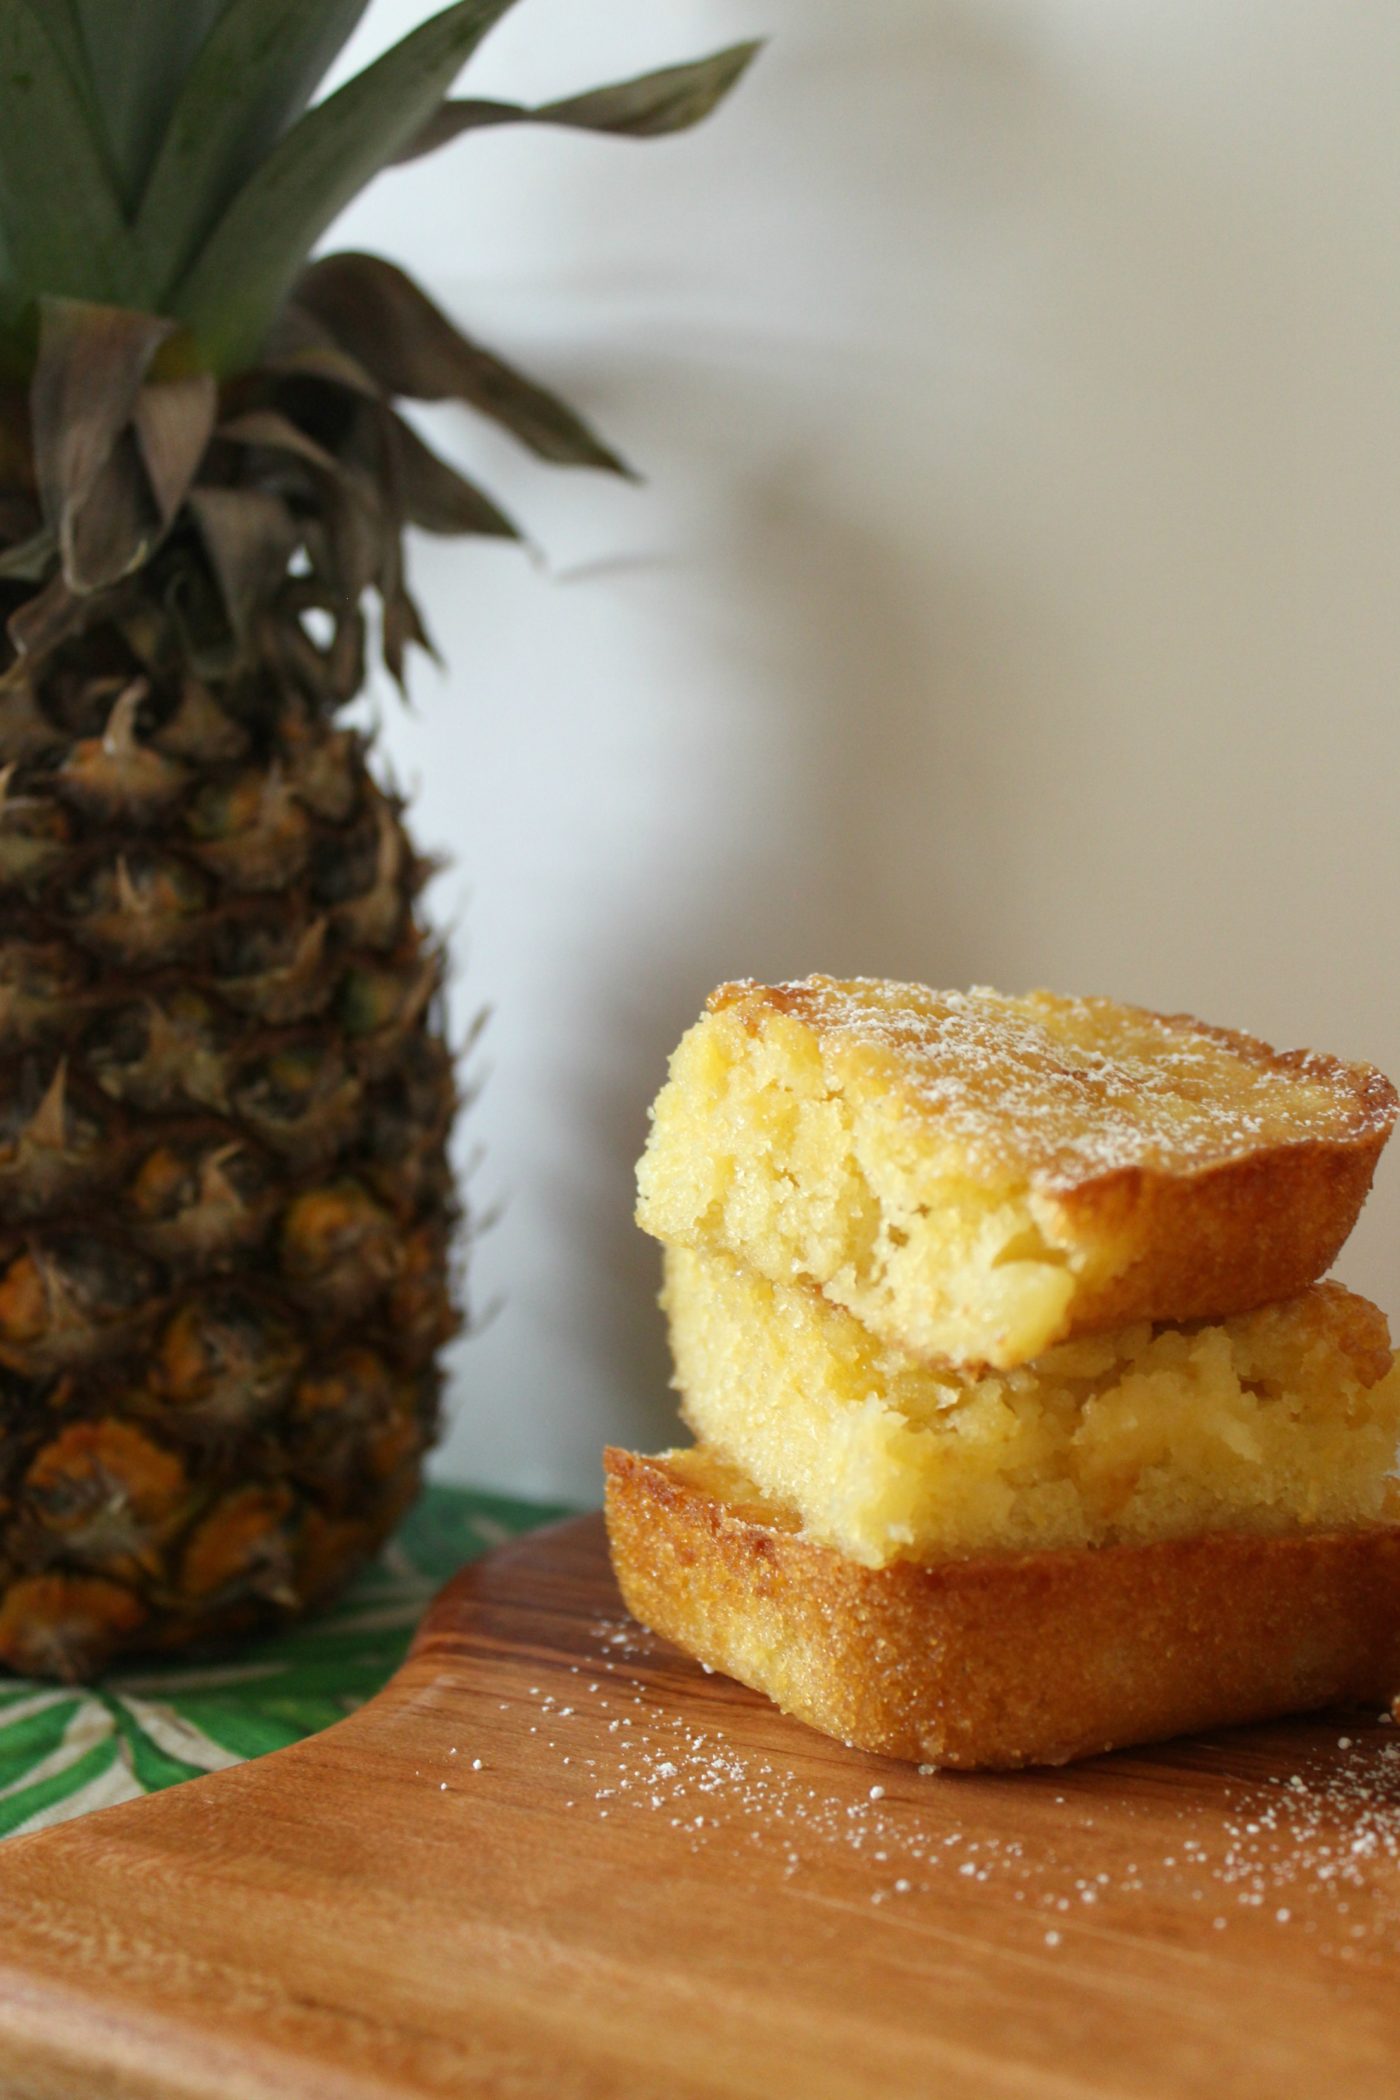 If you're desperate for an easy recipe that is delicous and takes no time to put together, try pineapple bars. Your life will be changed.